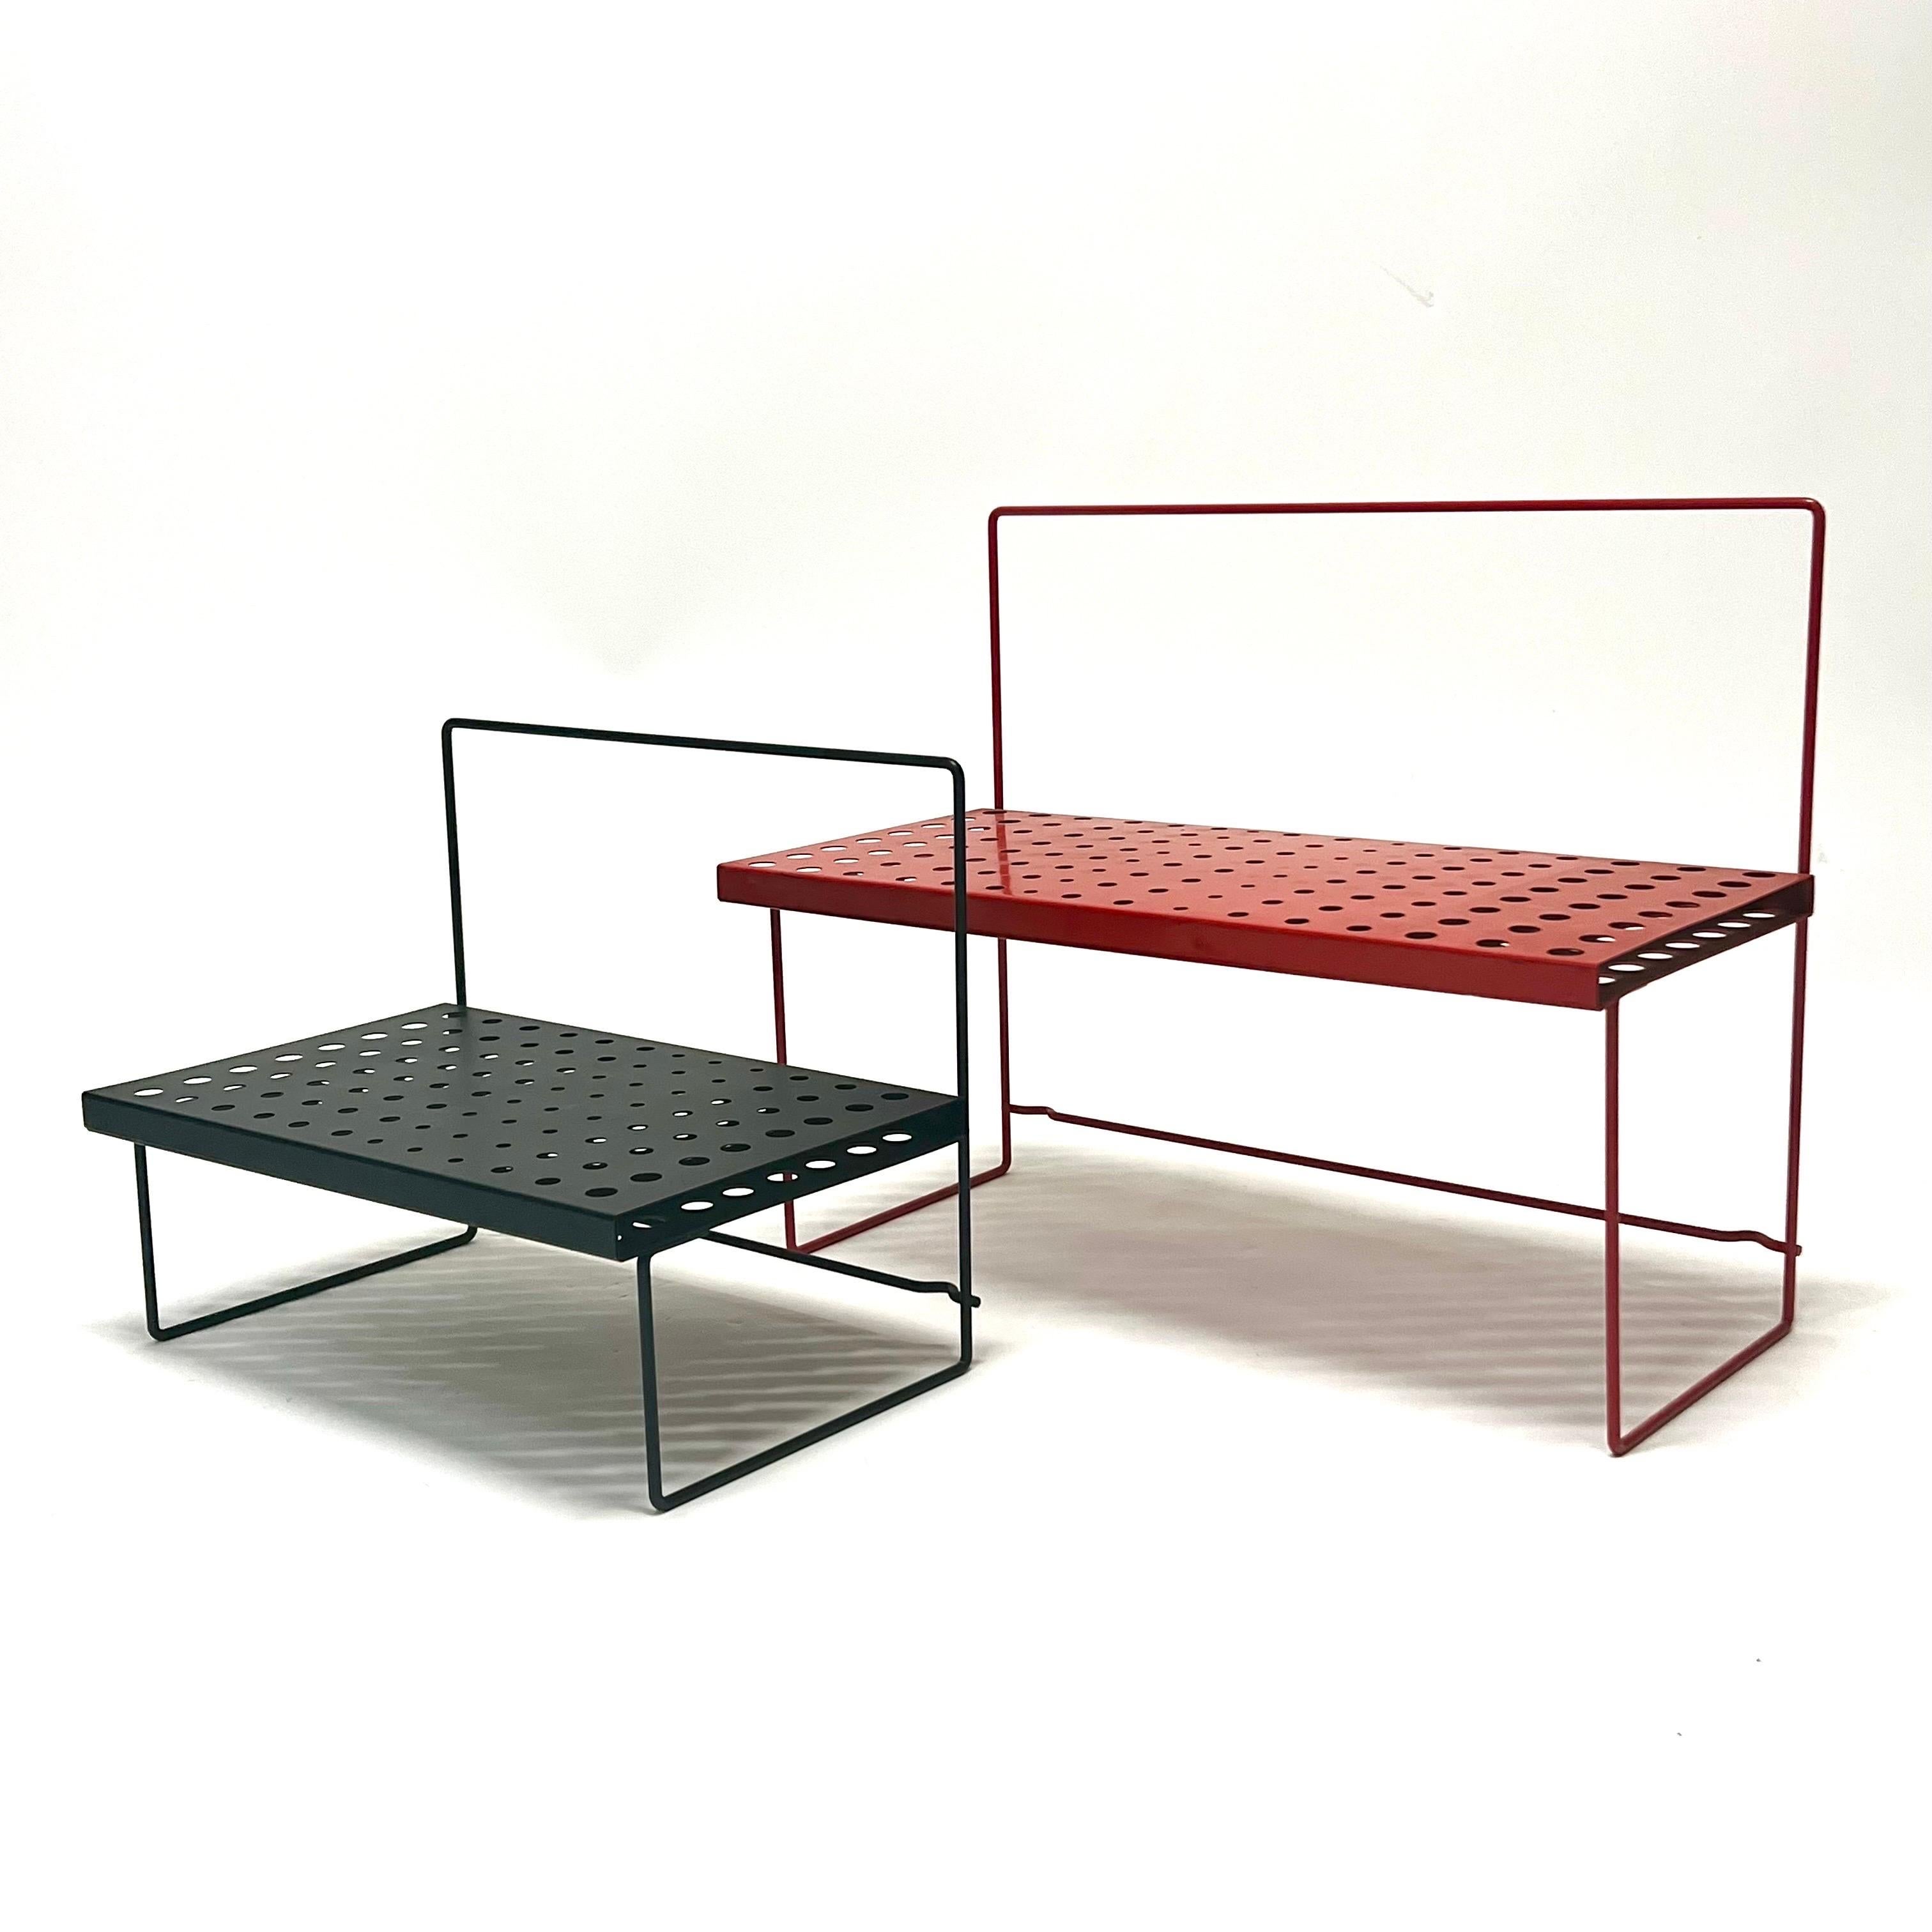 Vintage French Modern Perforated Metal Plant Stands, c1960s For Sale 4